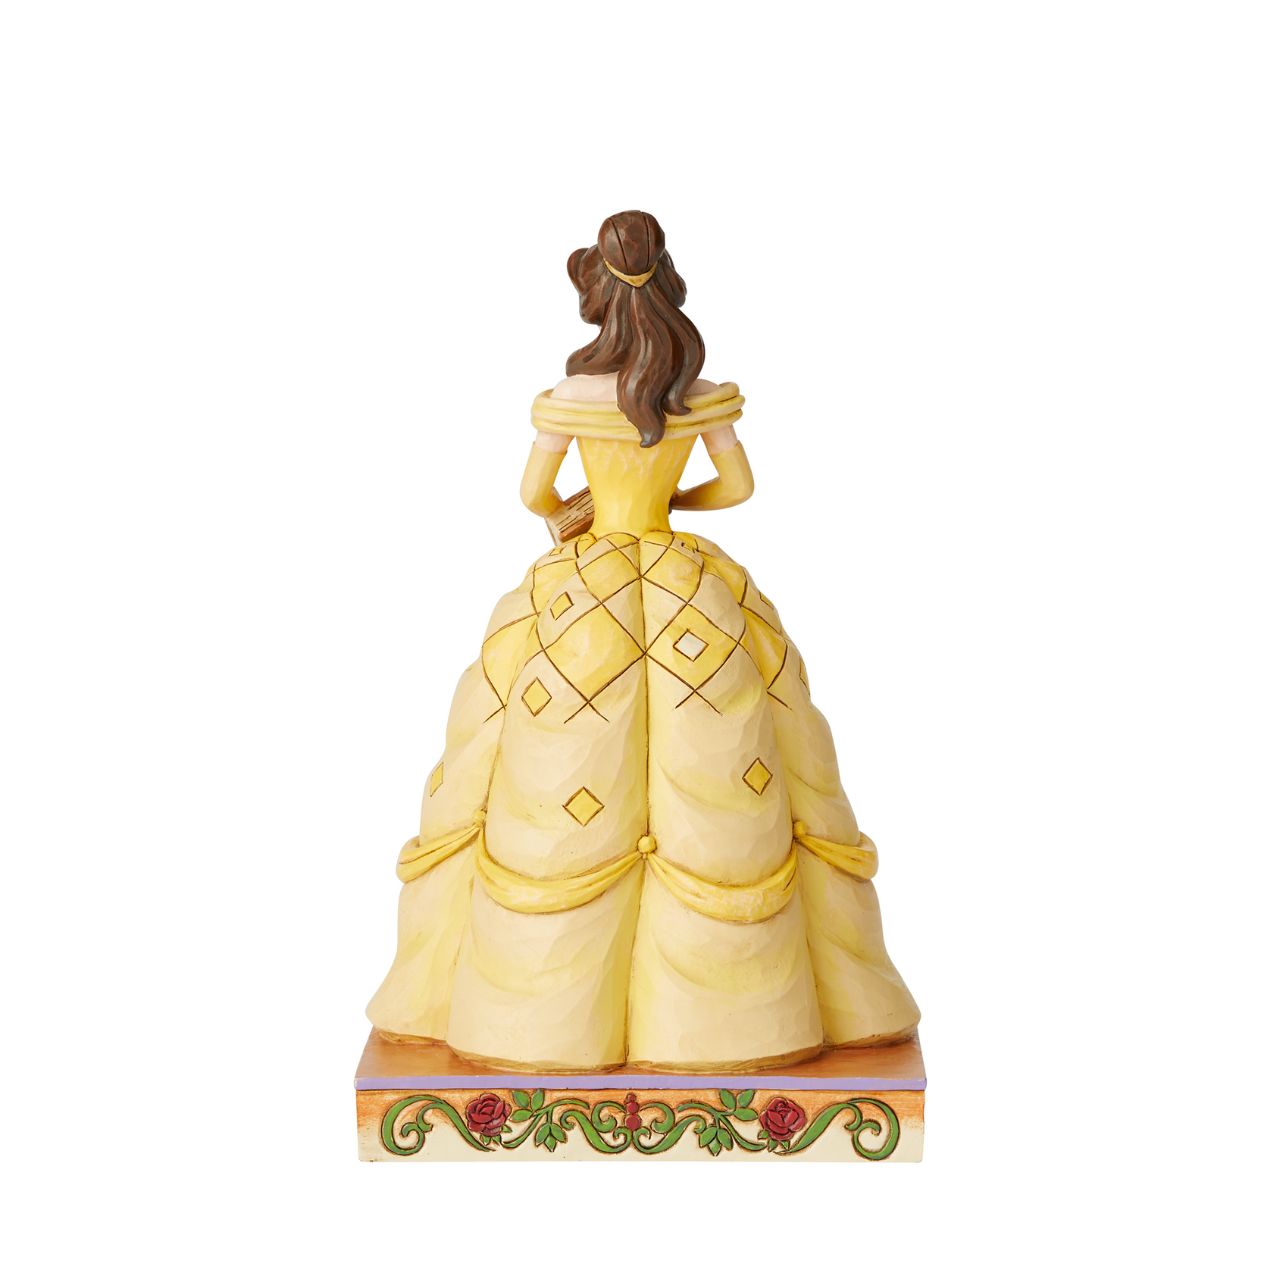 Disney Traditions Book-Smart Beauty Belle Princess Passion  Belle always has her nose in a book, filling her imagination with adventure. The book-smart beauty begins her own timeless tale when she meets the Beast. In this lovely Jim Shore design, Belle wears her classic yellow gown and holds a book in her hands.